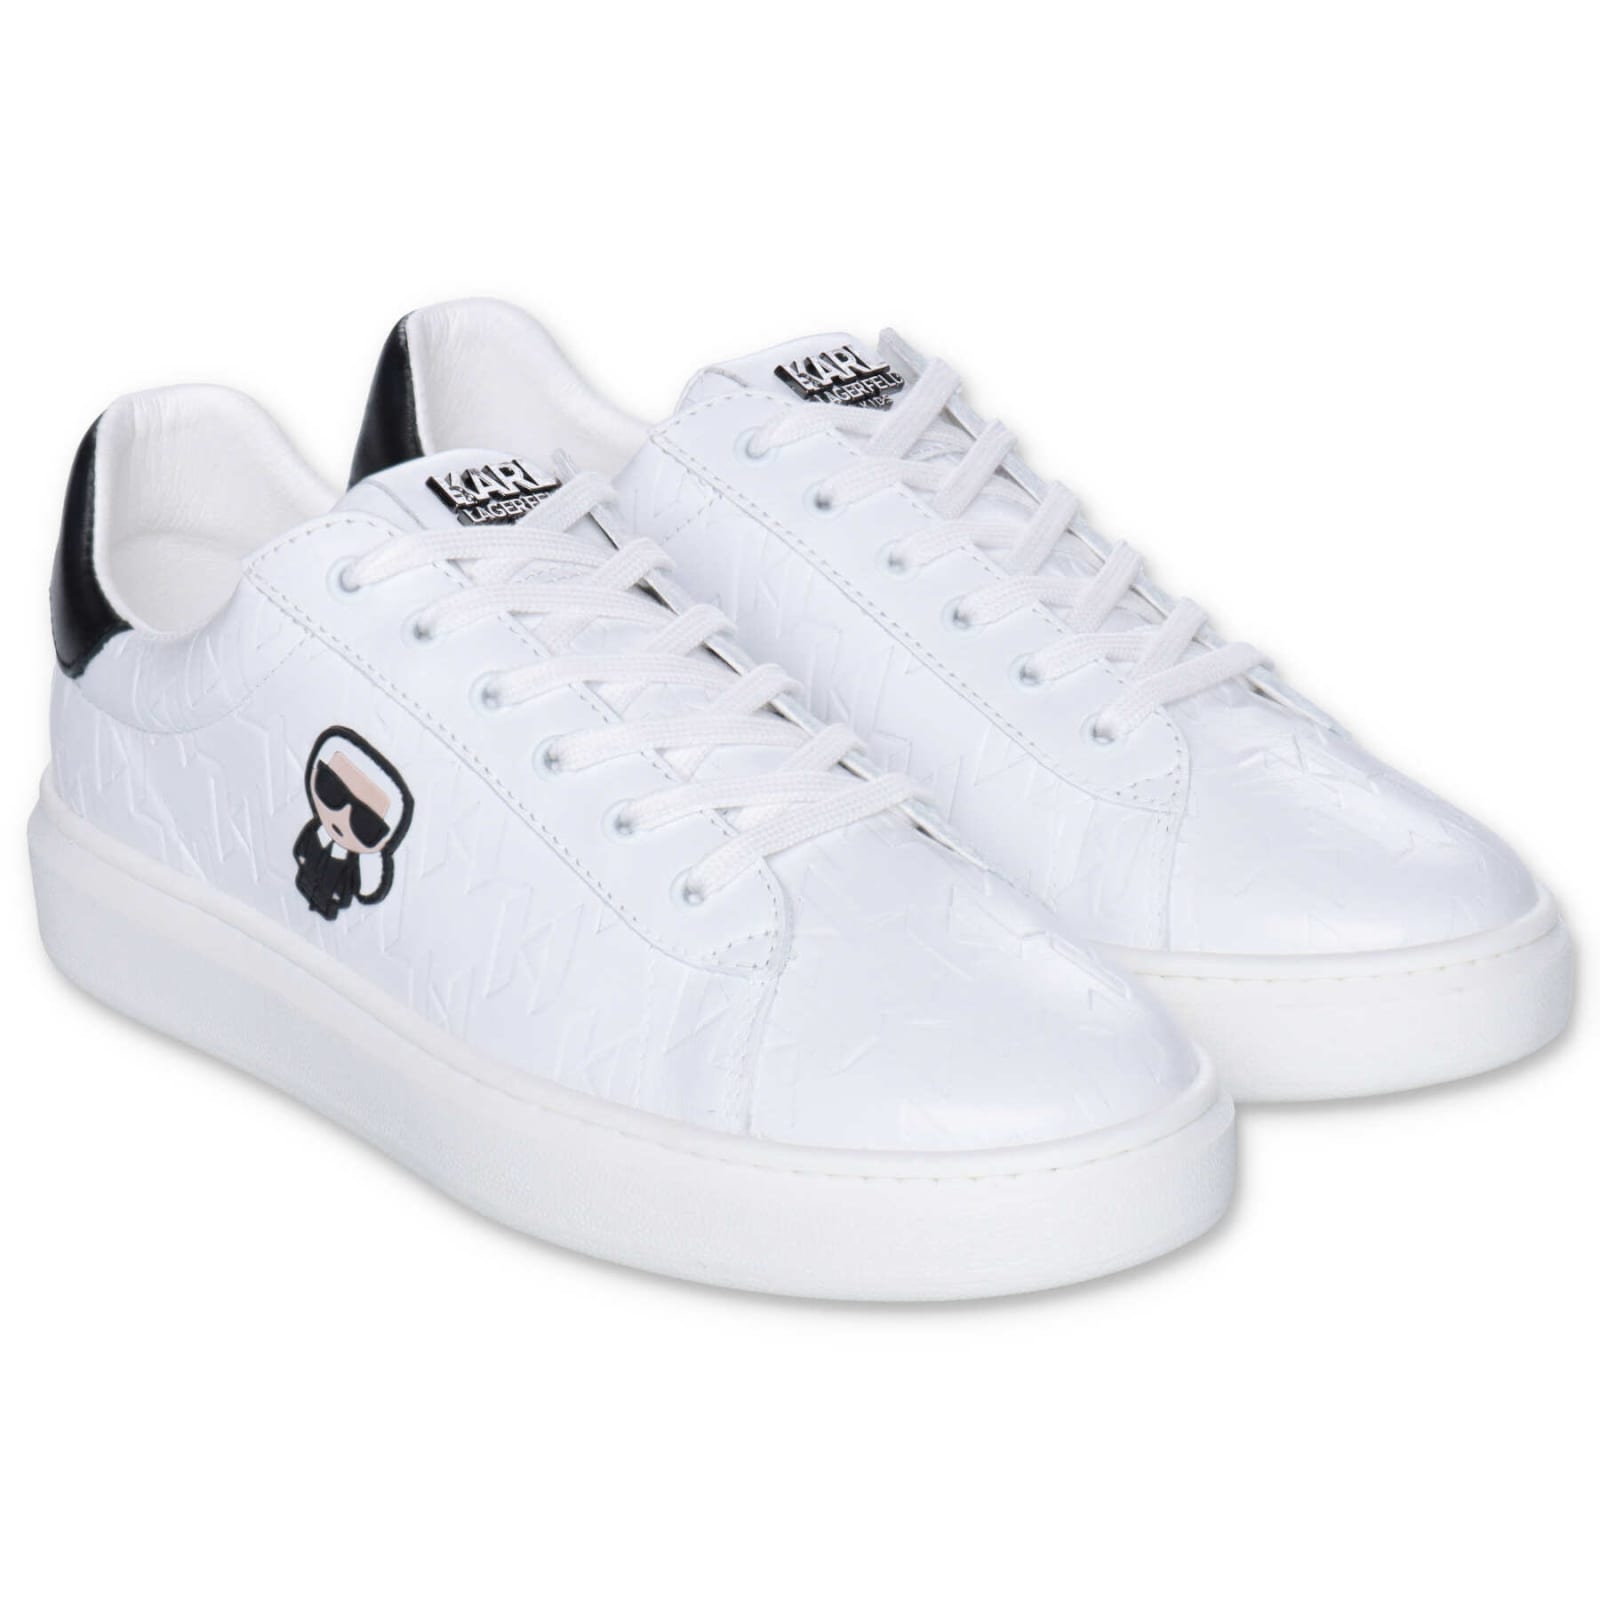 Karl Lagerfeld Sneakers Bianche In Pelle Con Lacci